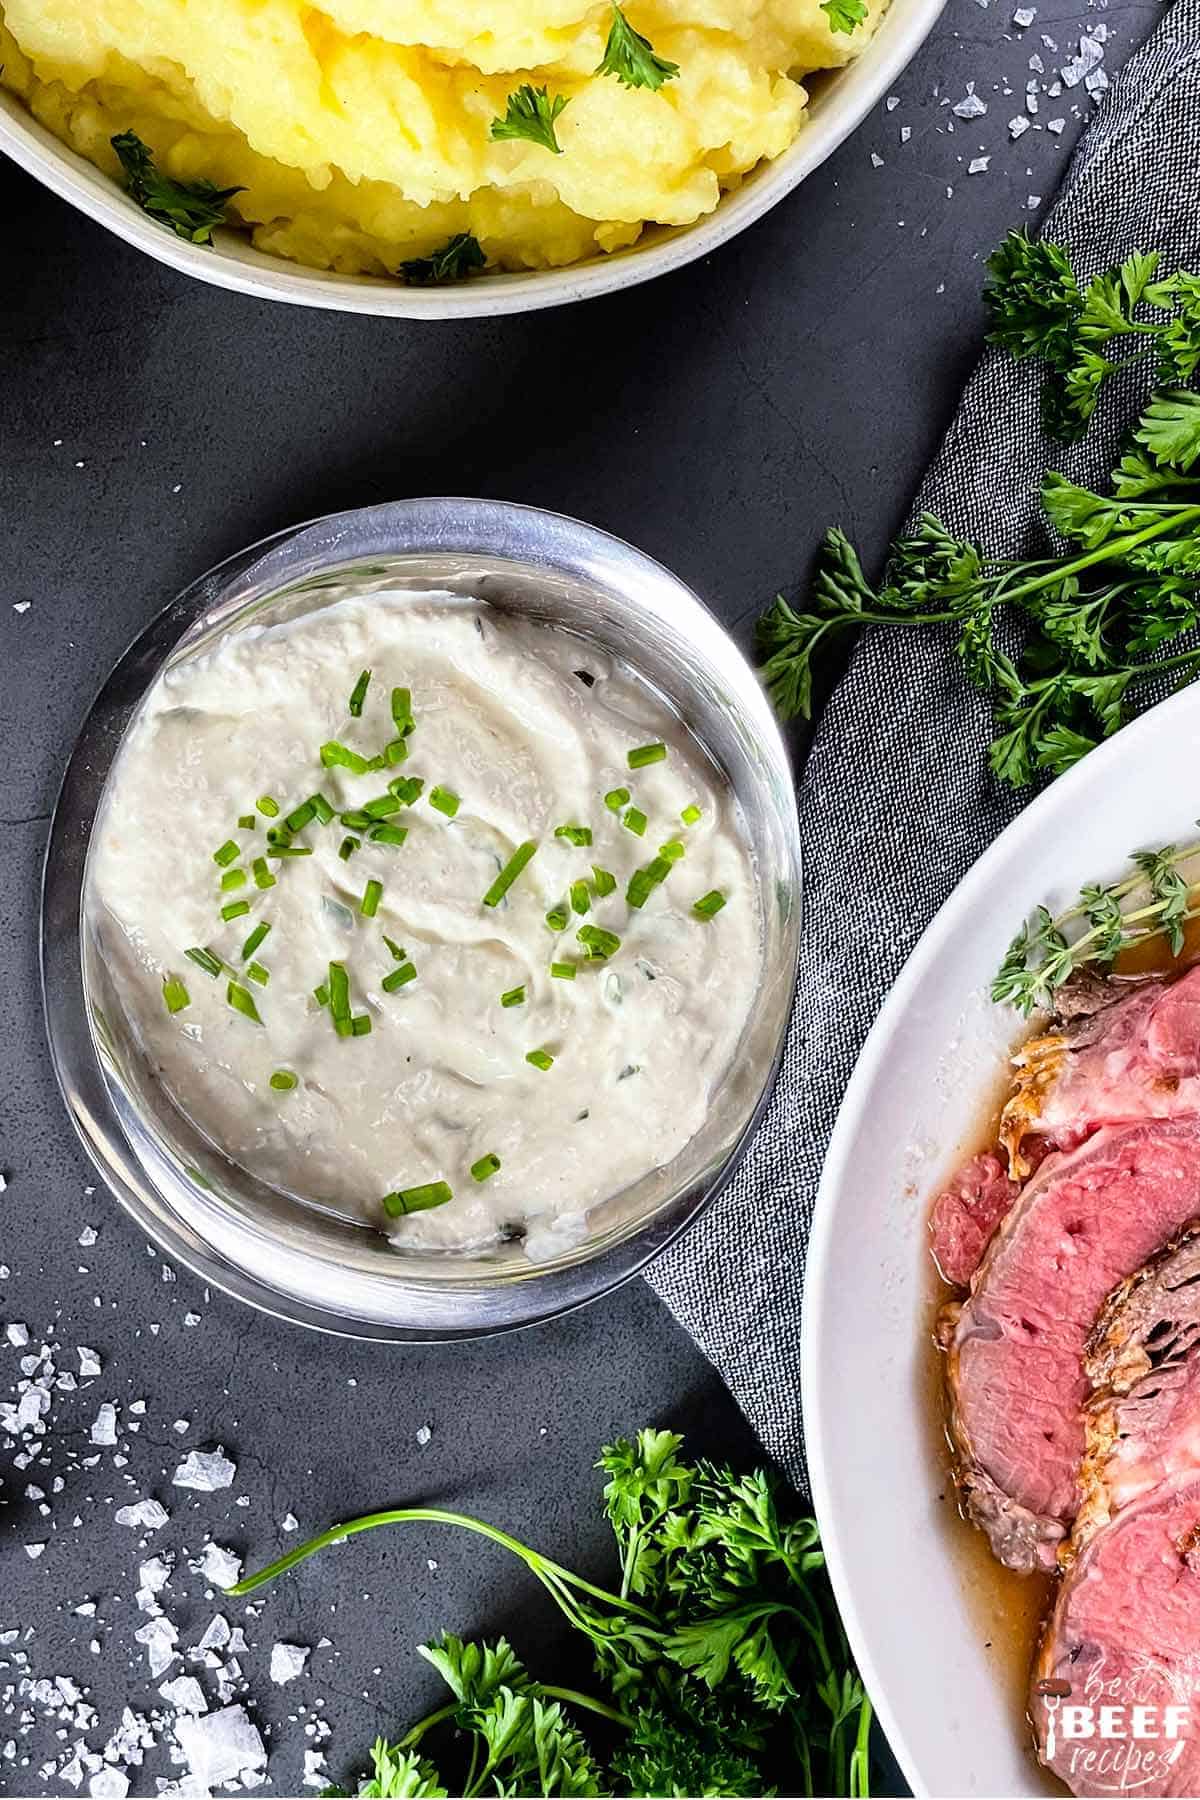 horseradish sauce in a silver bowl next to plate of prime rib